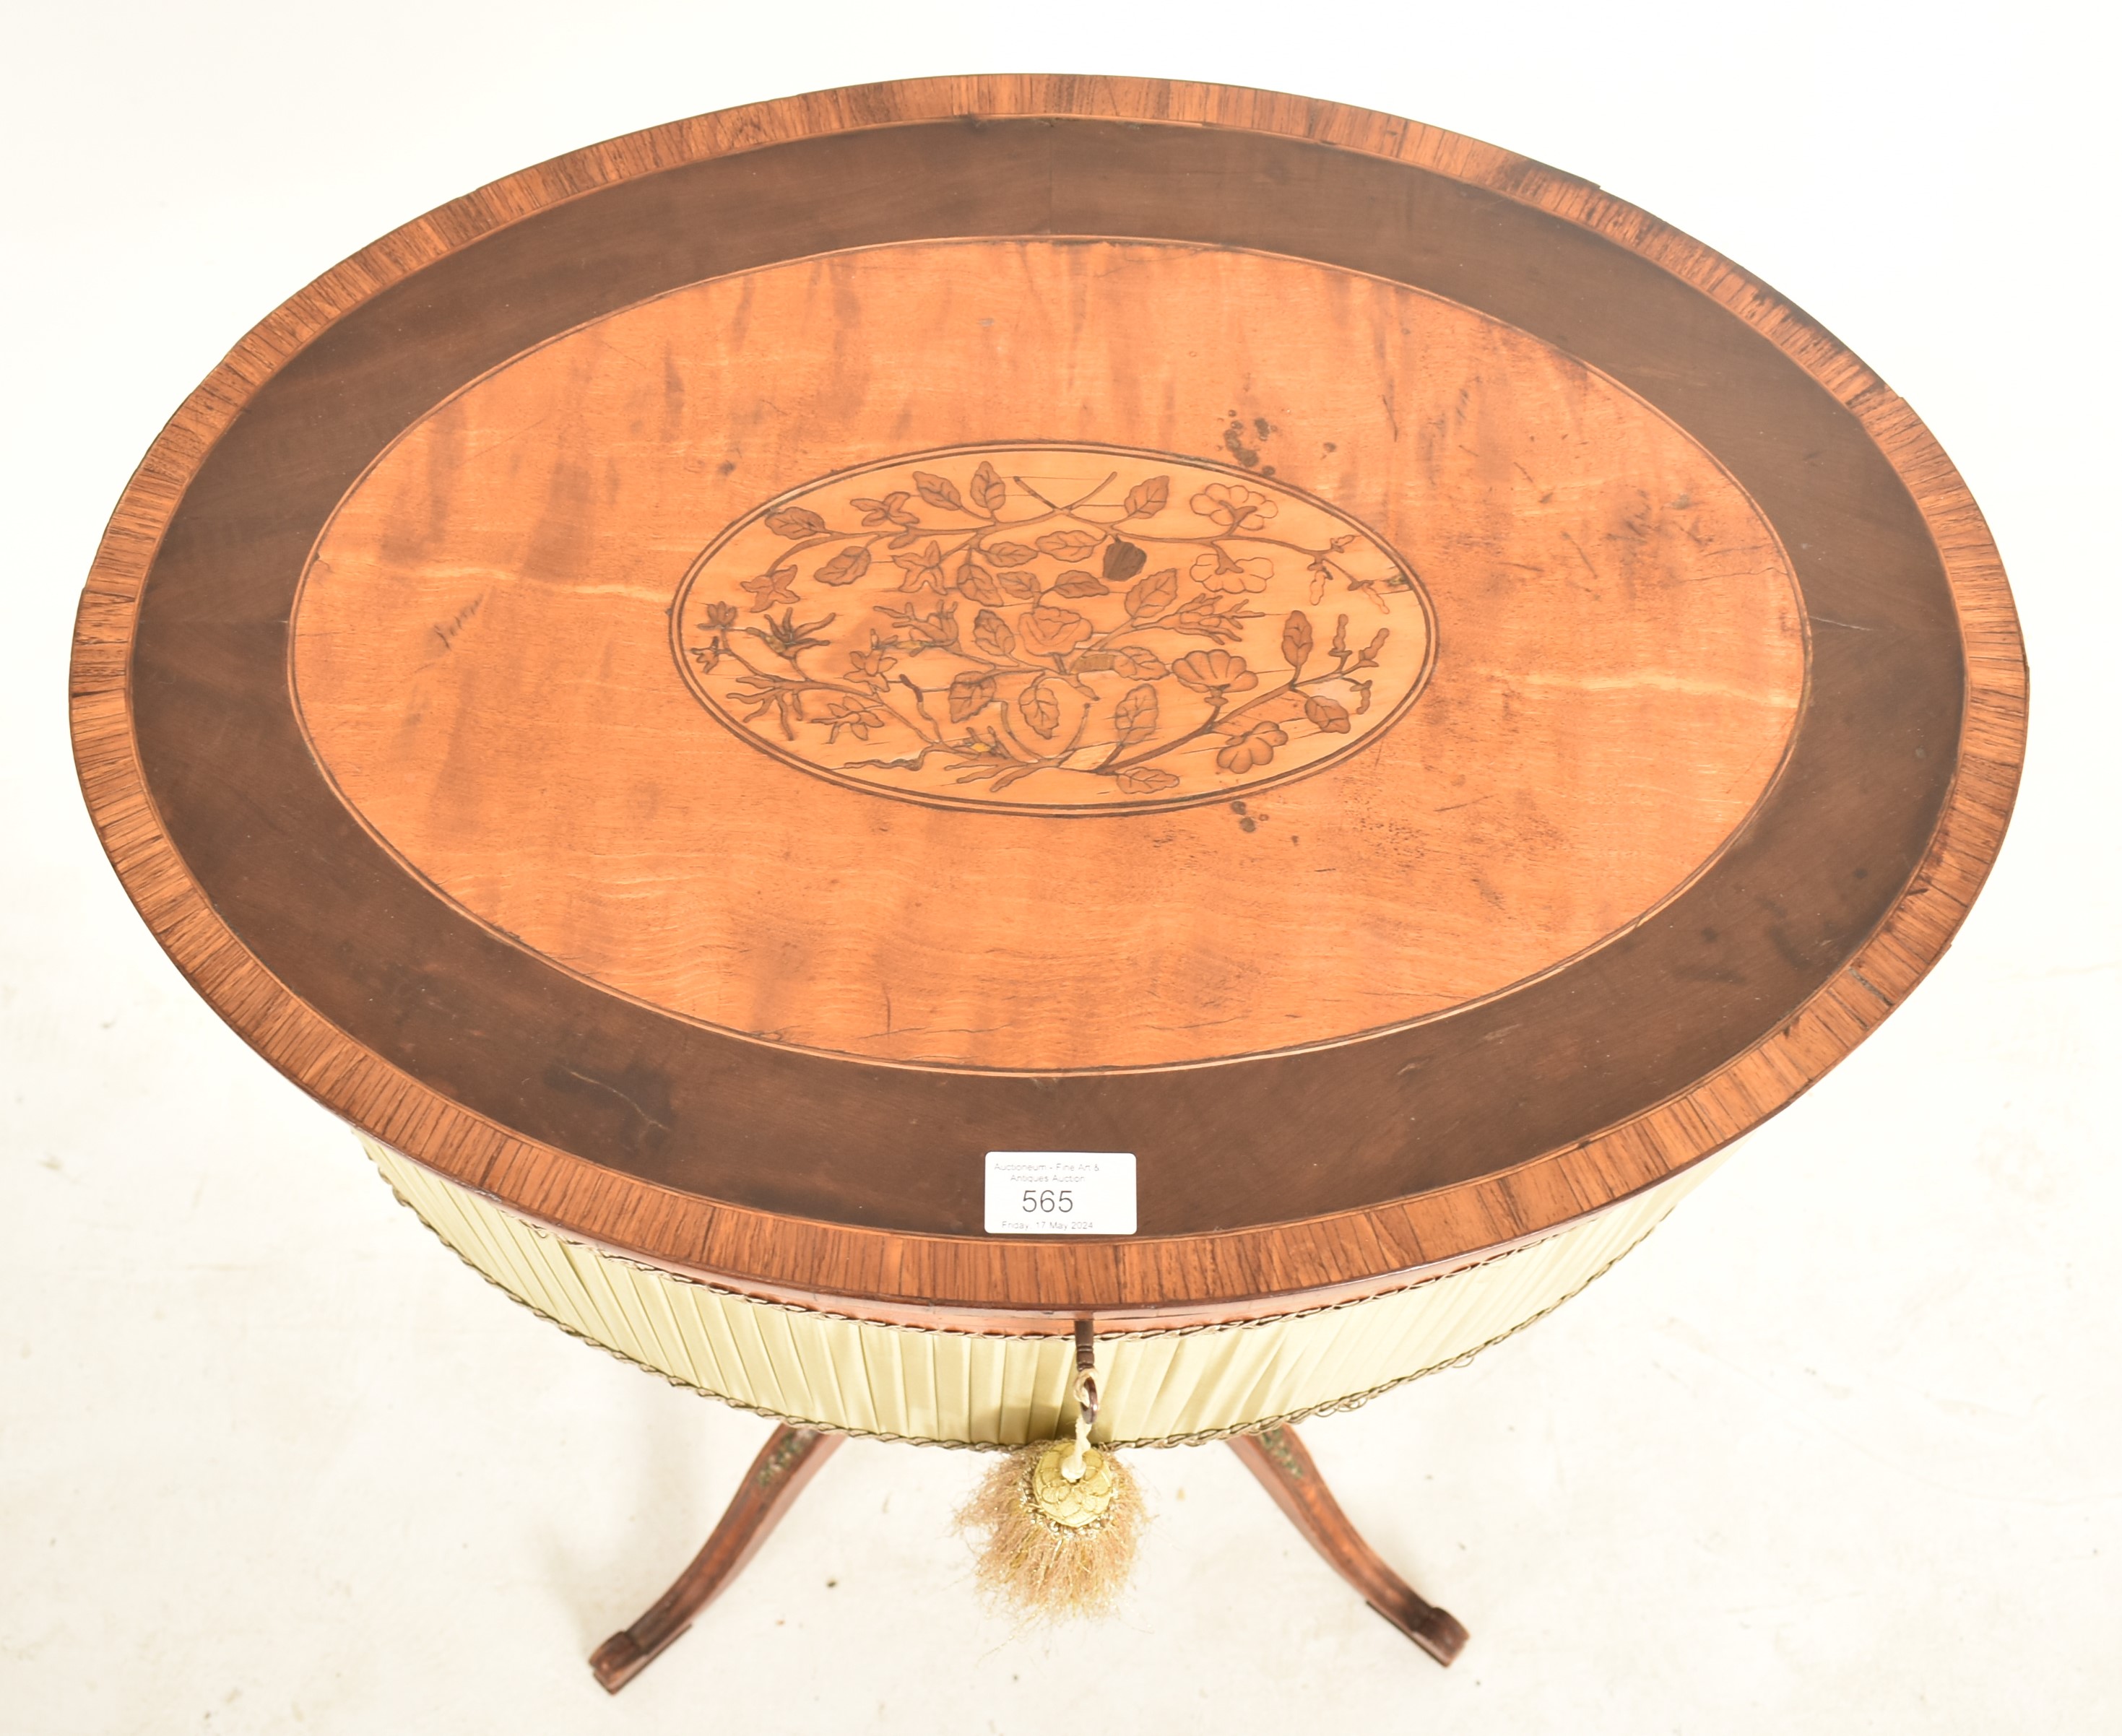 19TH CENTURY SHERATON REVIVAL SATINWOOD WORK TABLE - Image 2 of 6